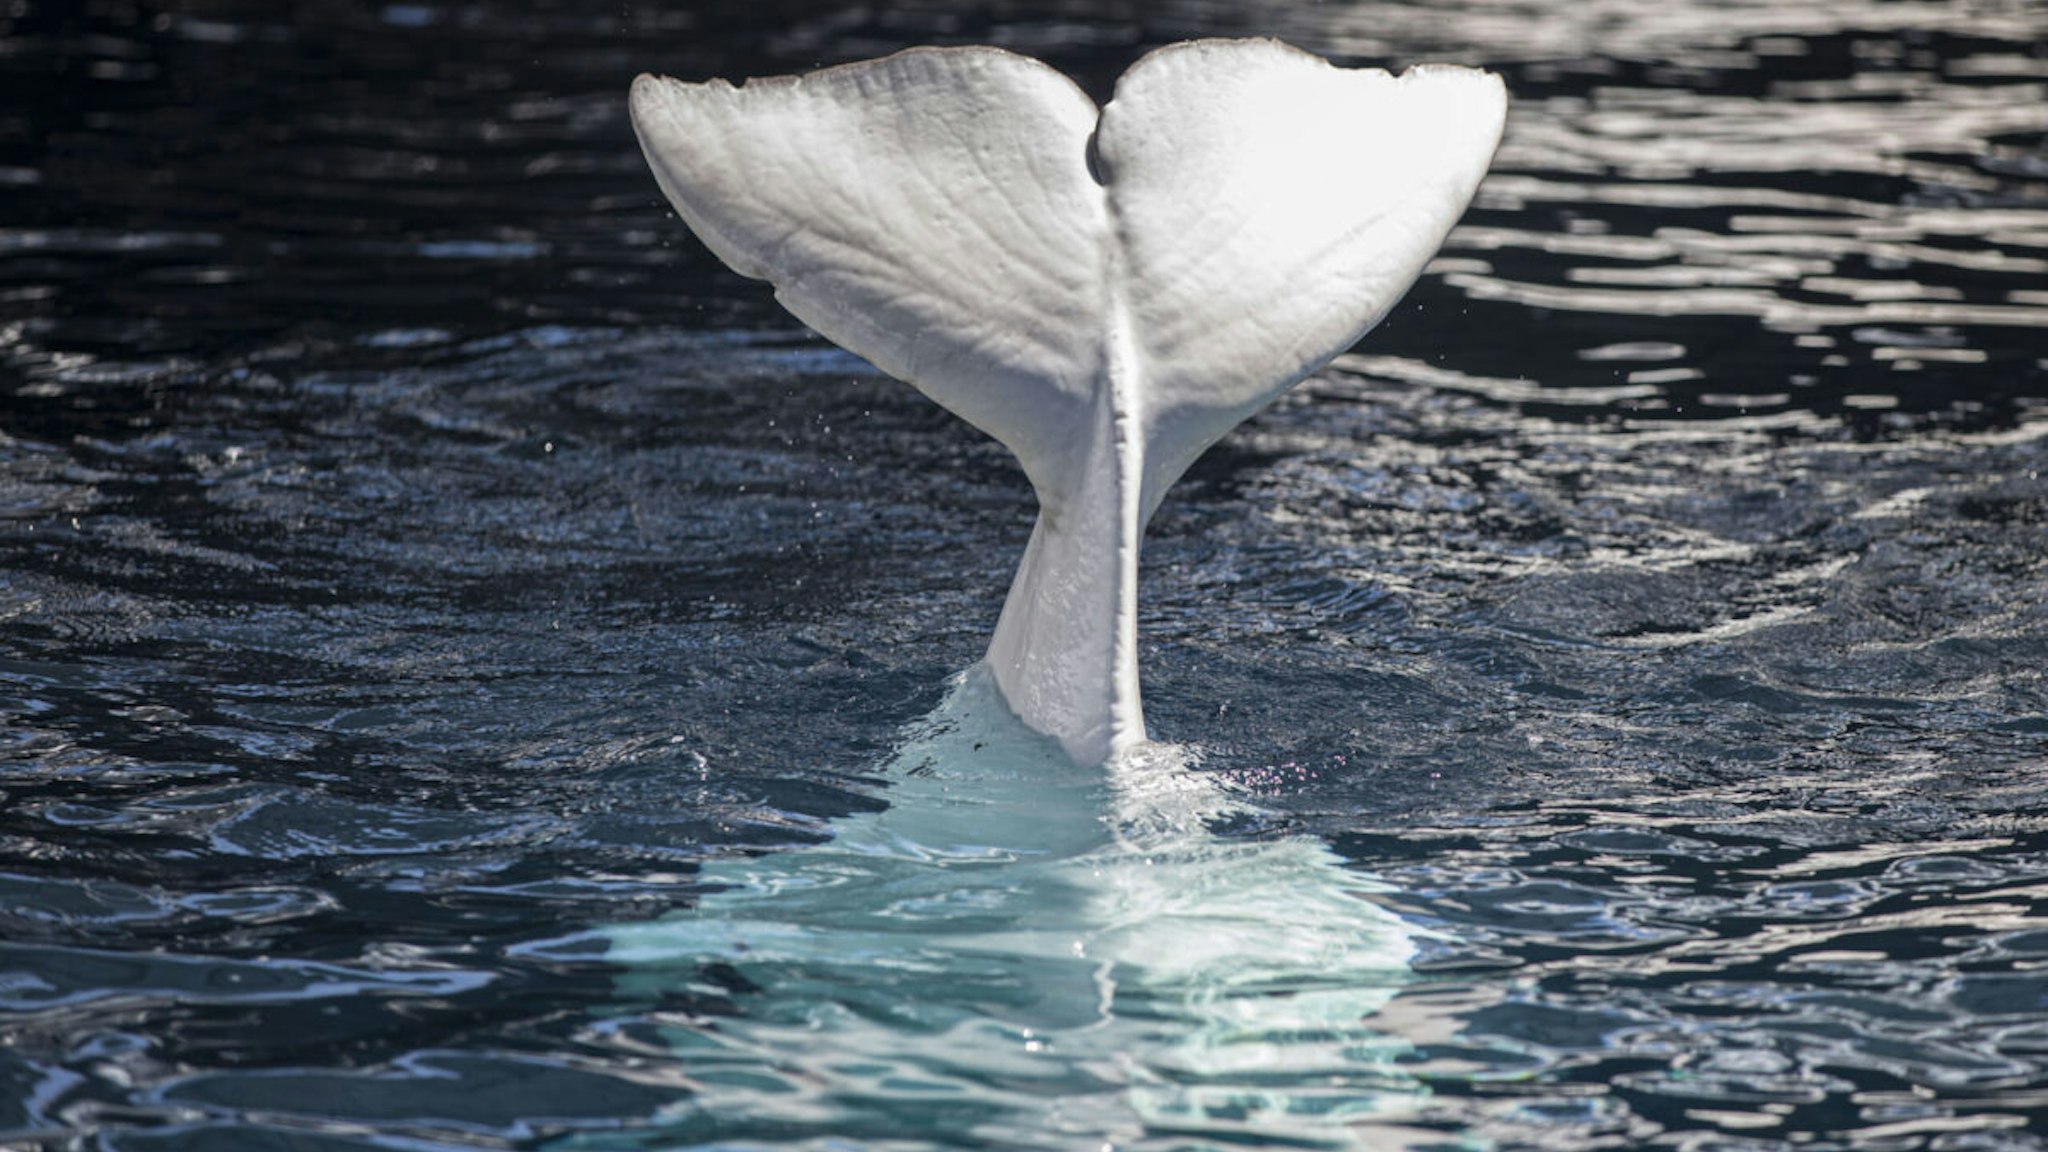 SAN DIEGO, CALIFORNIA - JULY 20: General view of beluga whales at Wild Arctic at SeaWorld on July 20, 2021 in San Diego, California.